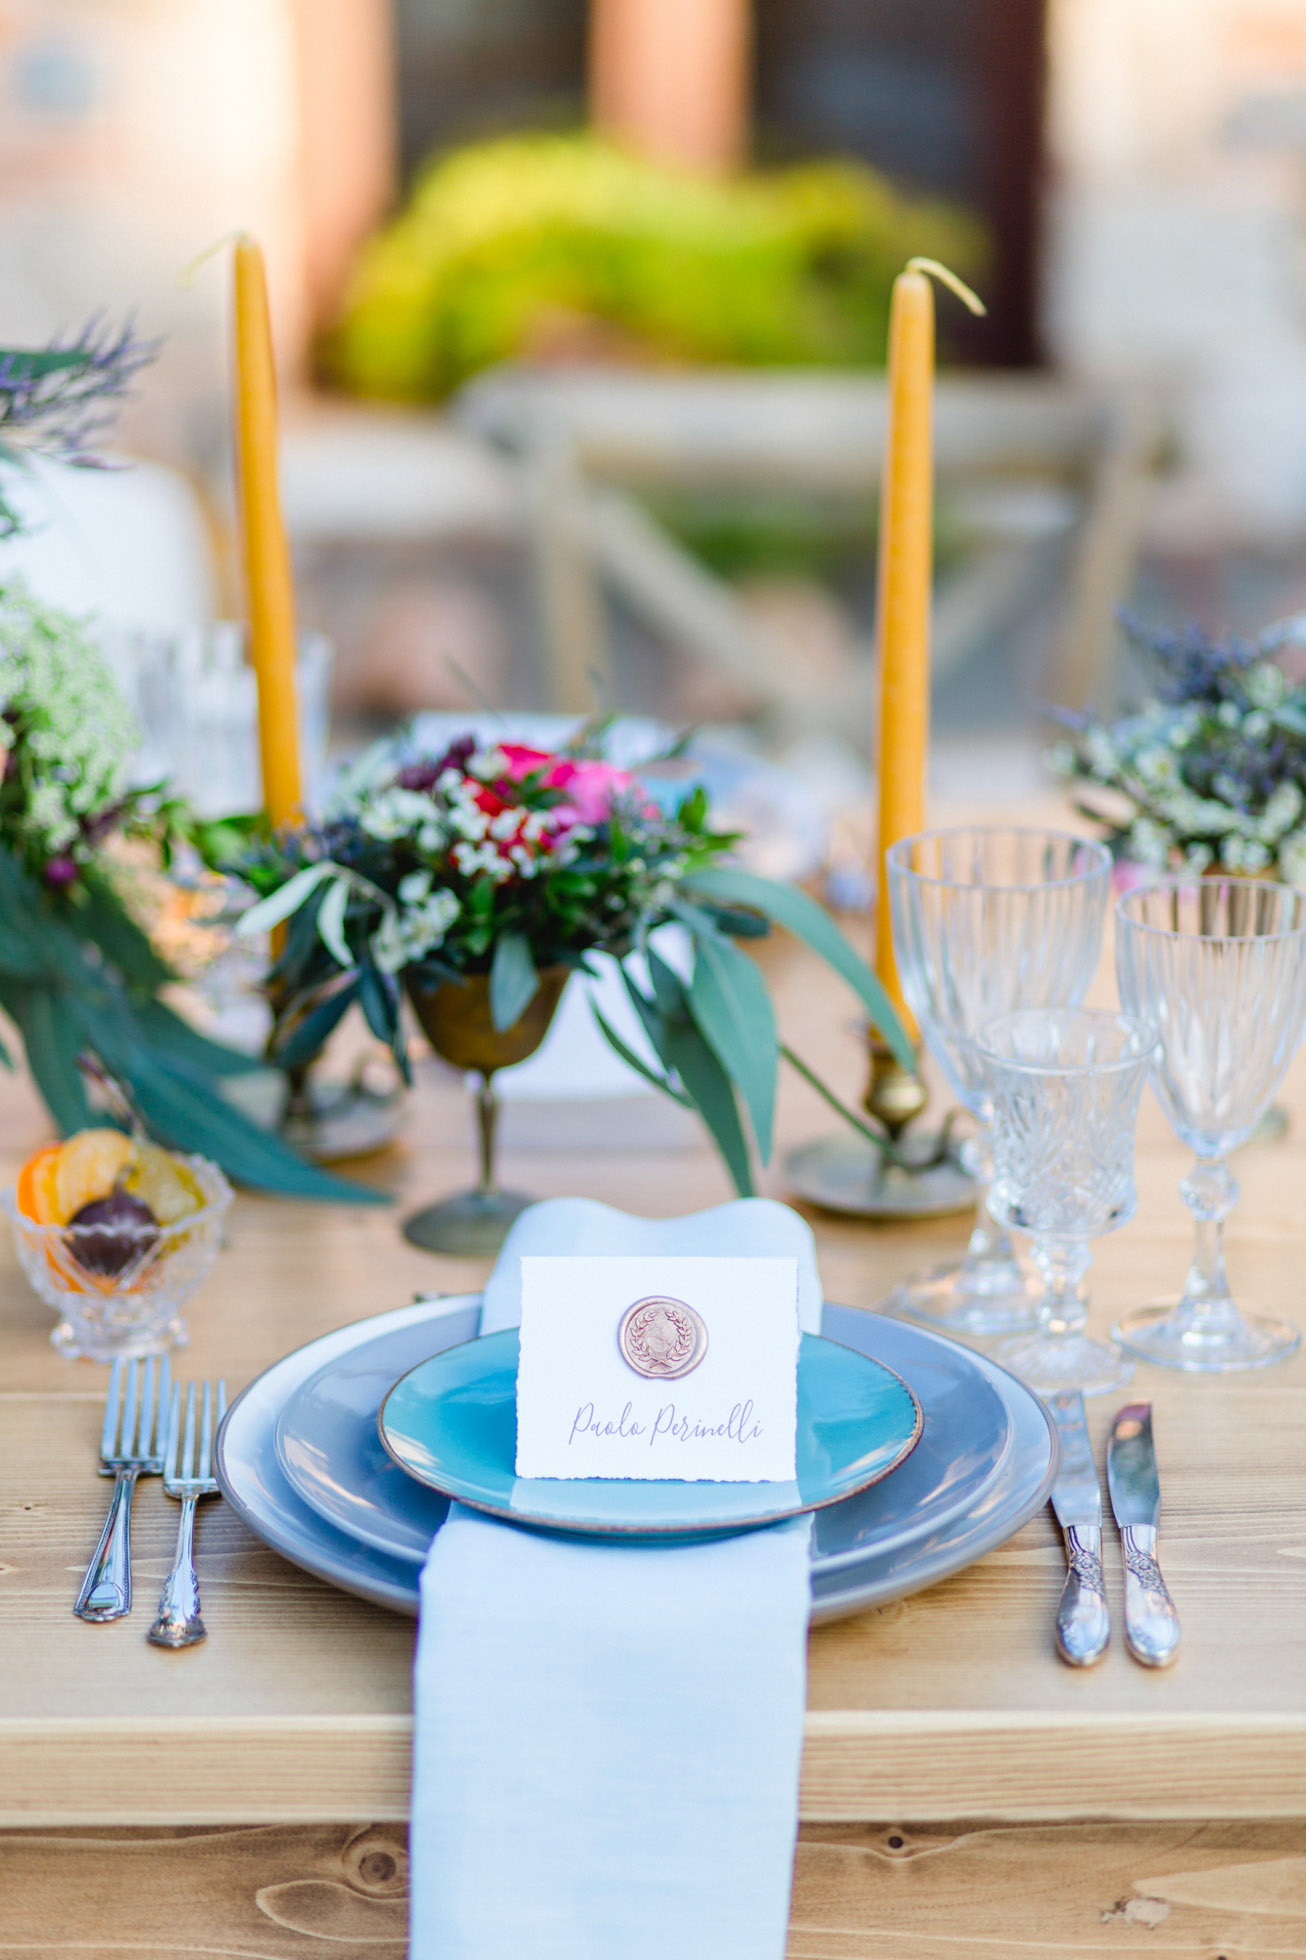 Wedding day dinner reception set up with delicate details, elegant plates, seasonal flowers and personalized place cards styled and photographed in Pyrgos Petreza Athens.